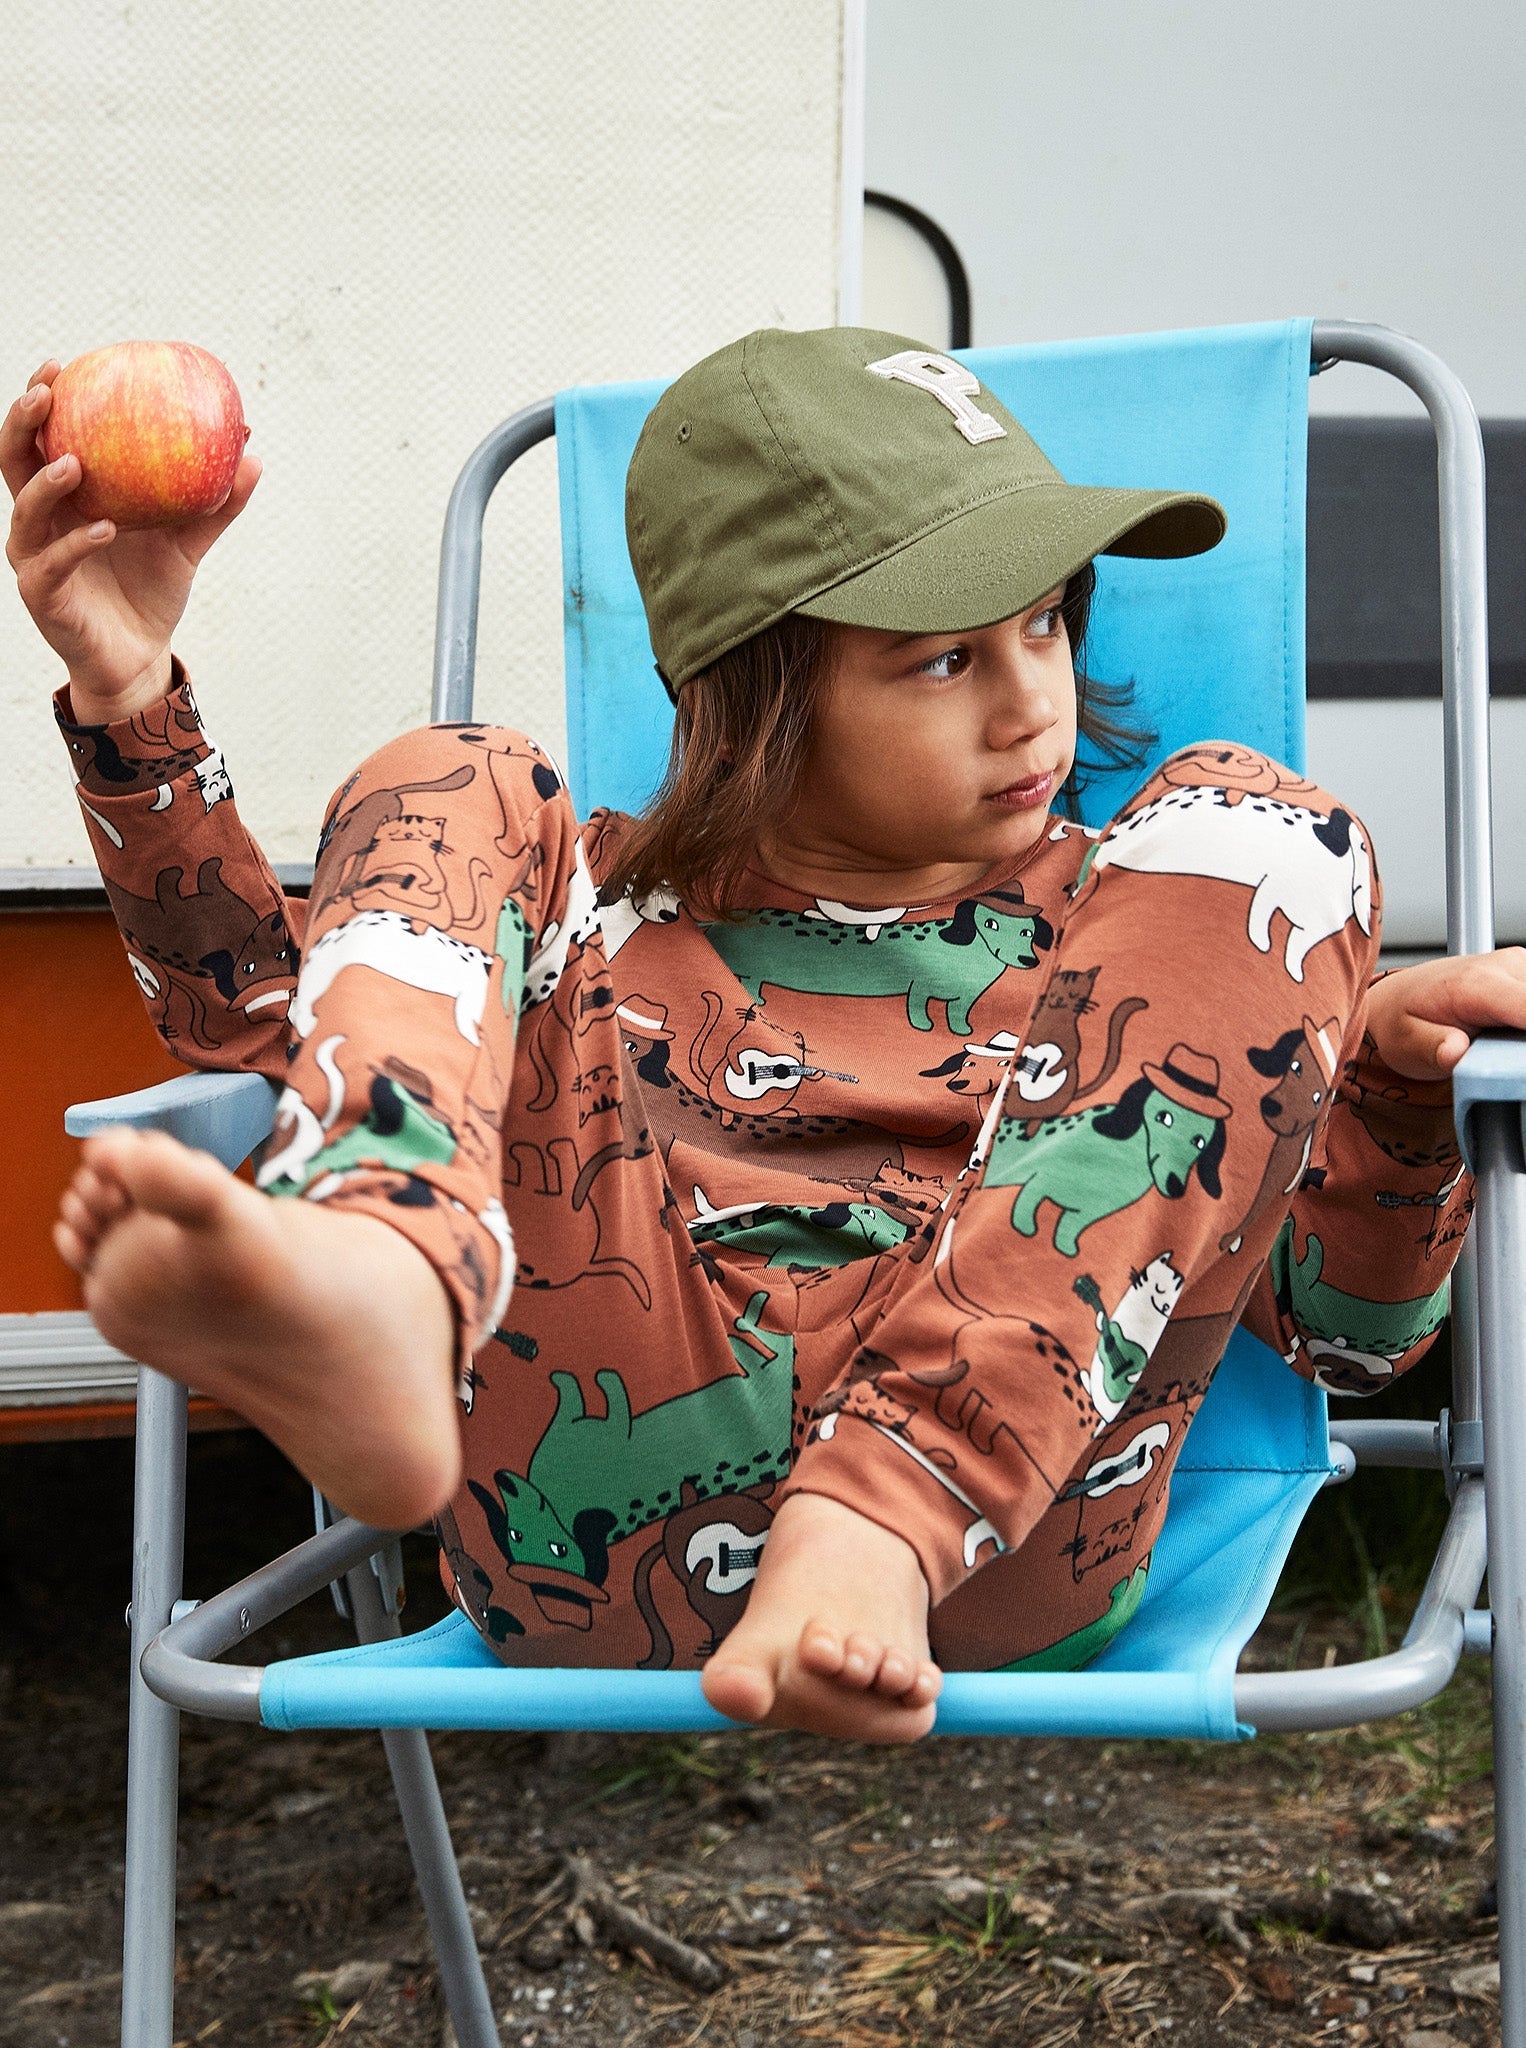 Organic Cotton Dog Print Kids Leggings from the Polarn O. Pyret Kidswear collection. Nordic kids clothes made from sustainable sources.